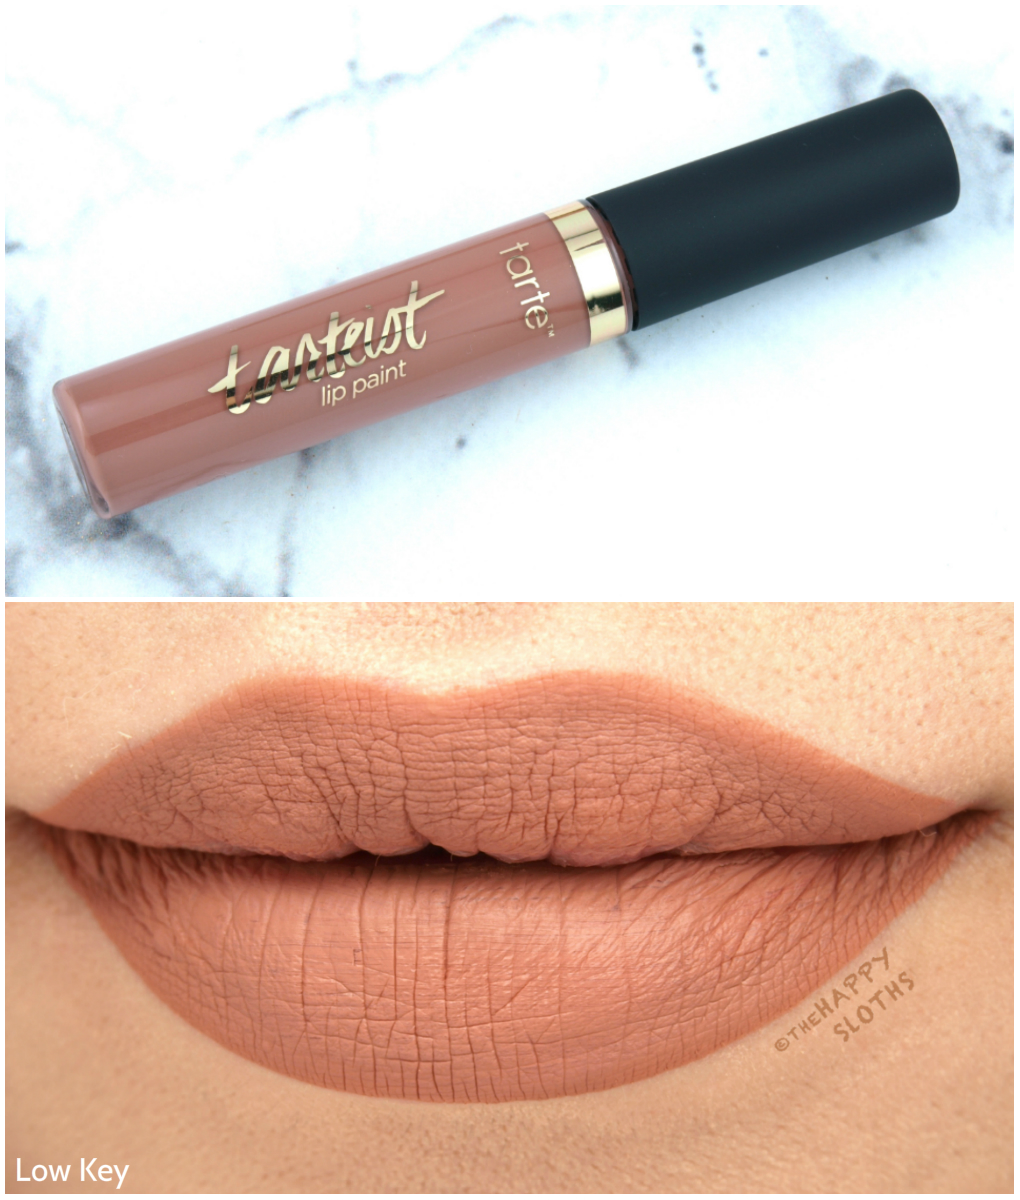 Tarte Tarteist Quick Dry Lip Paint in "Low Key": Review and Swatches